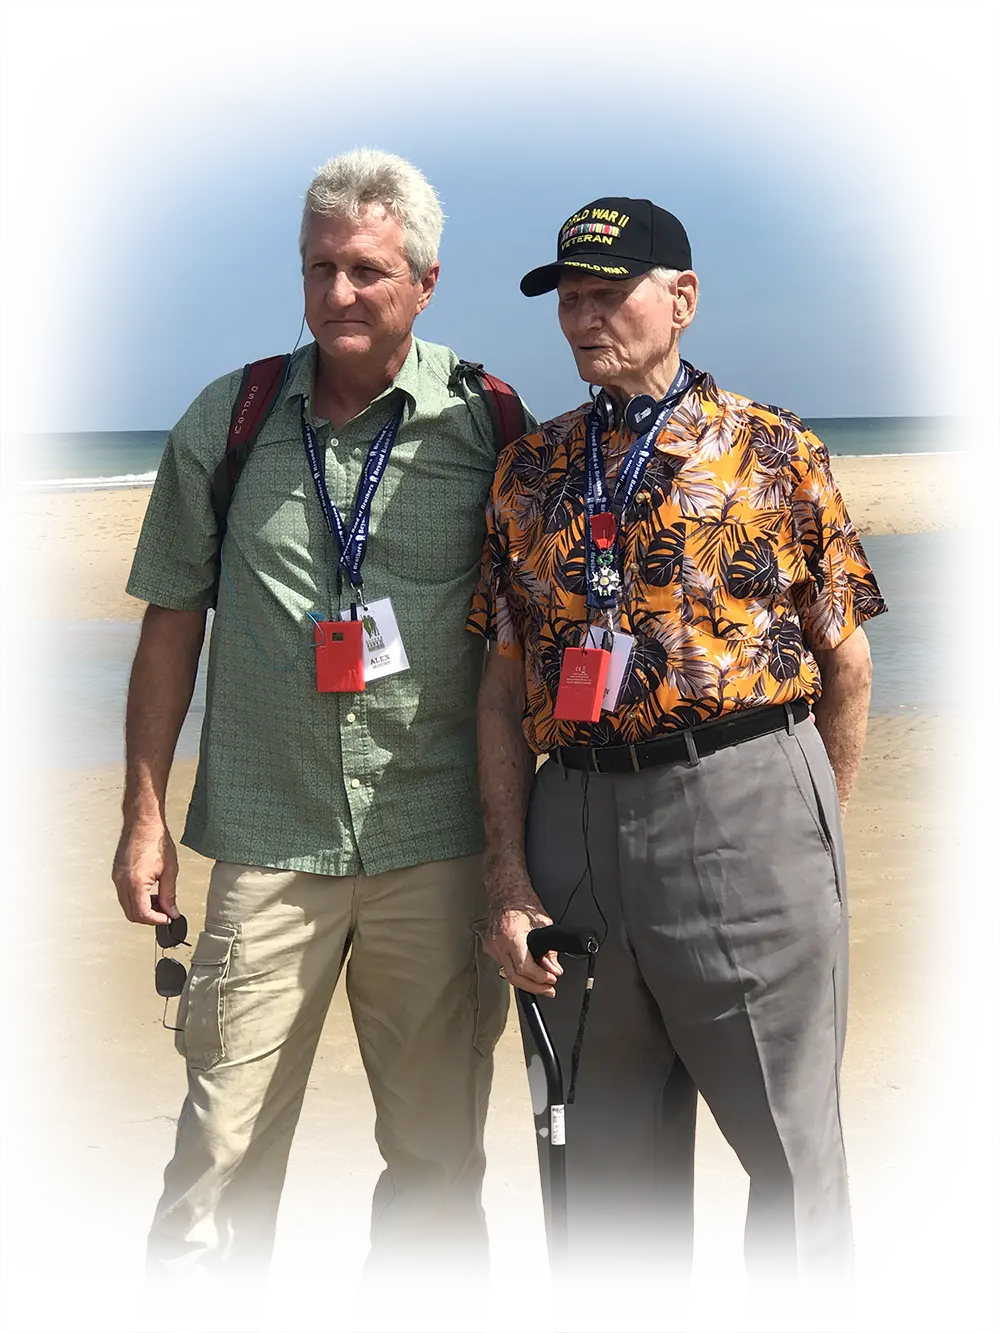 Alex Moore and Donald Hayhurst visiting Normandy